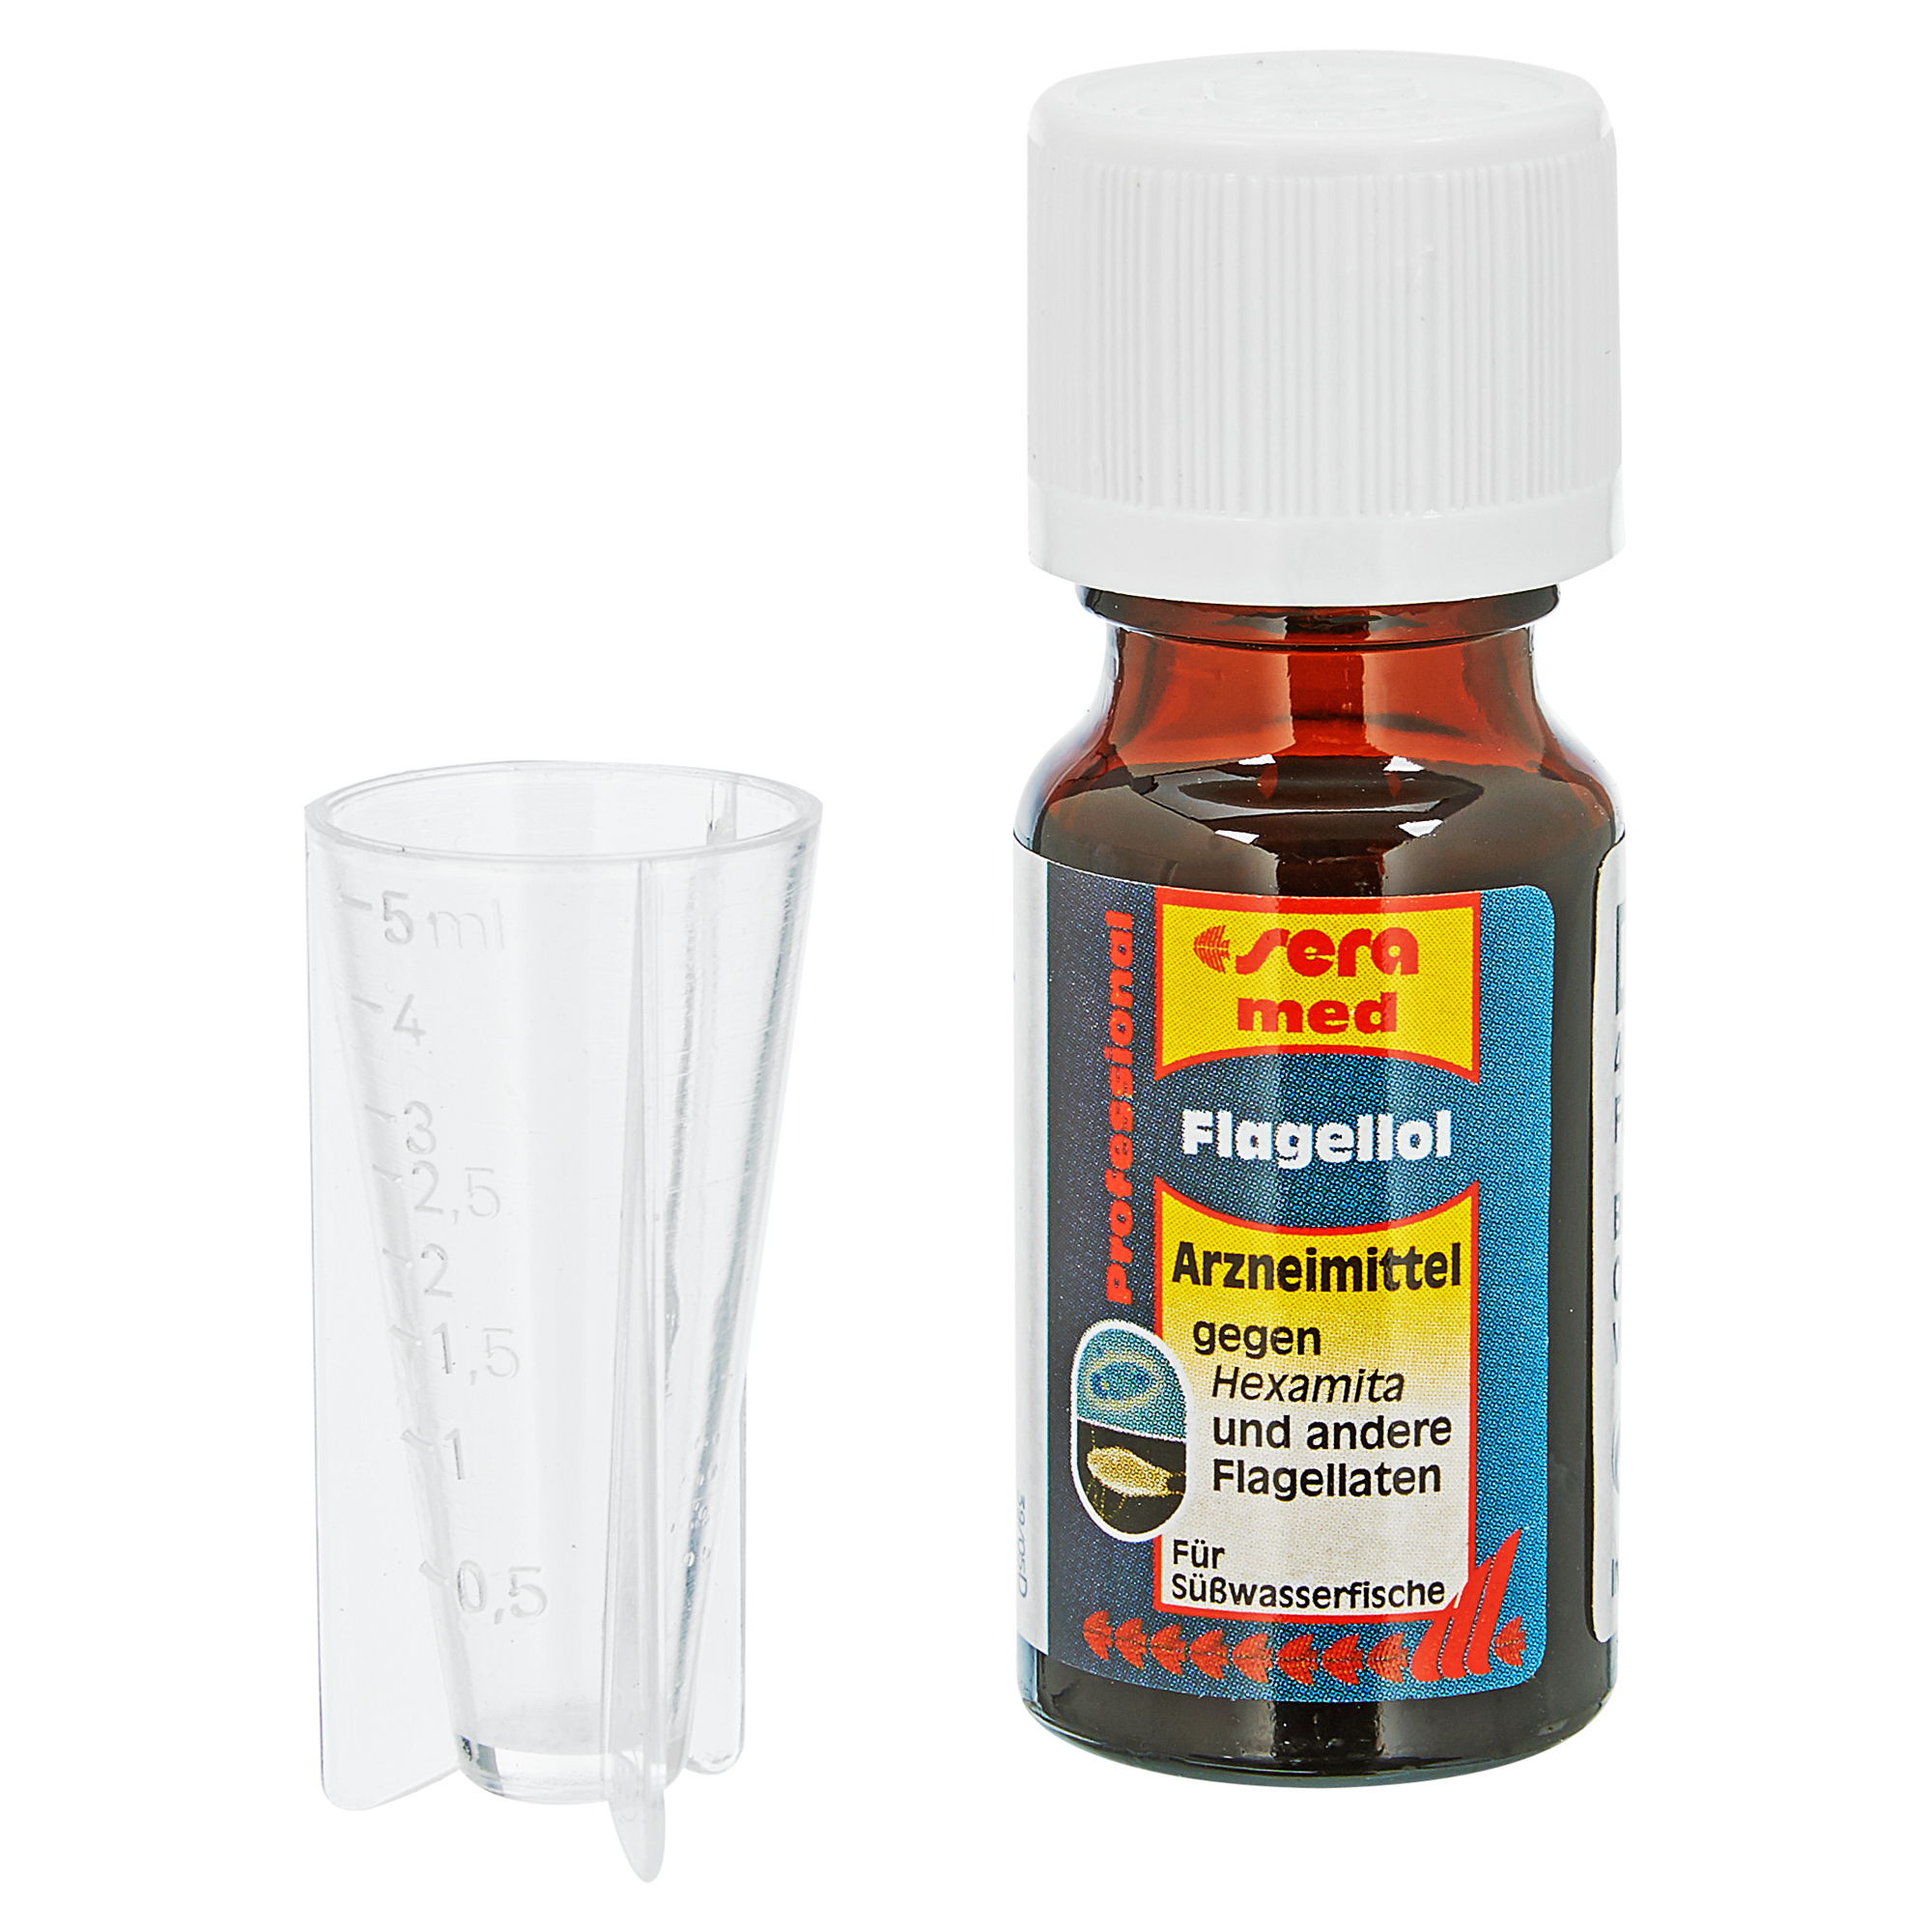 Fischarznei "Flagellol" 10 ml + product picture